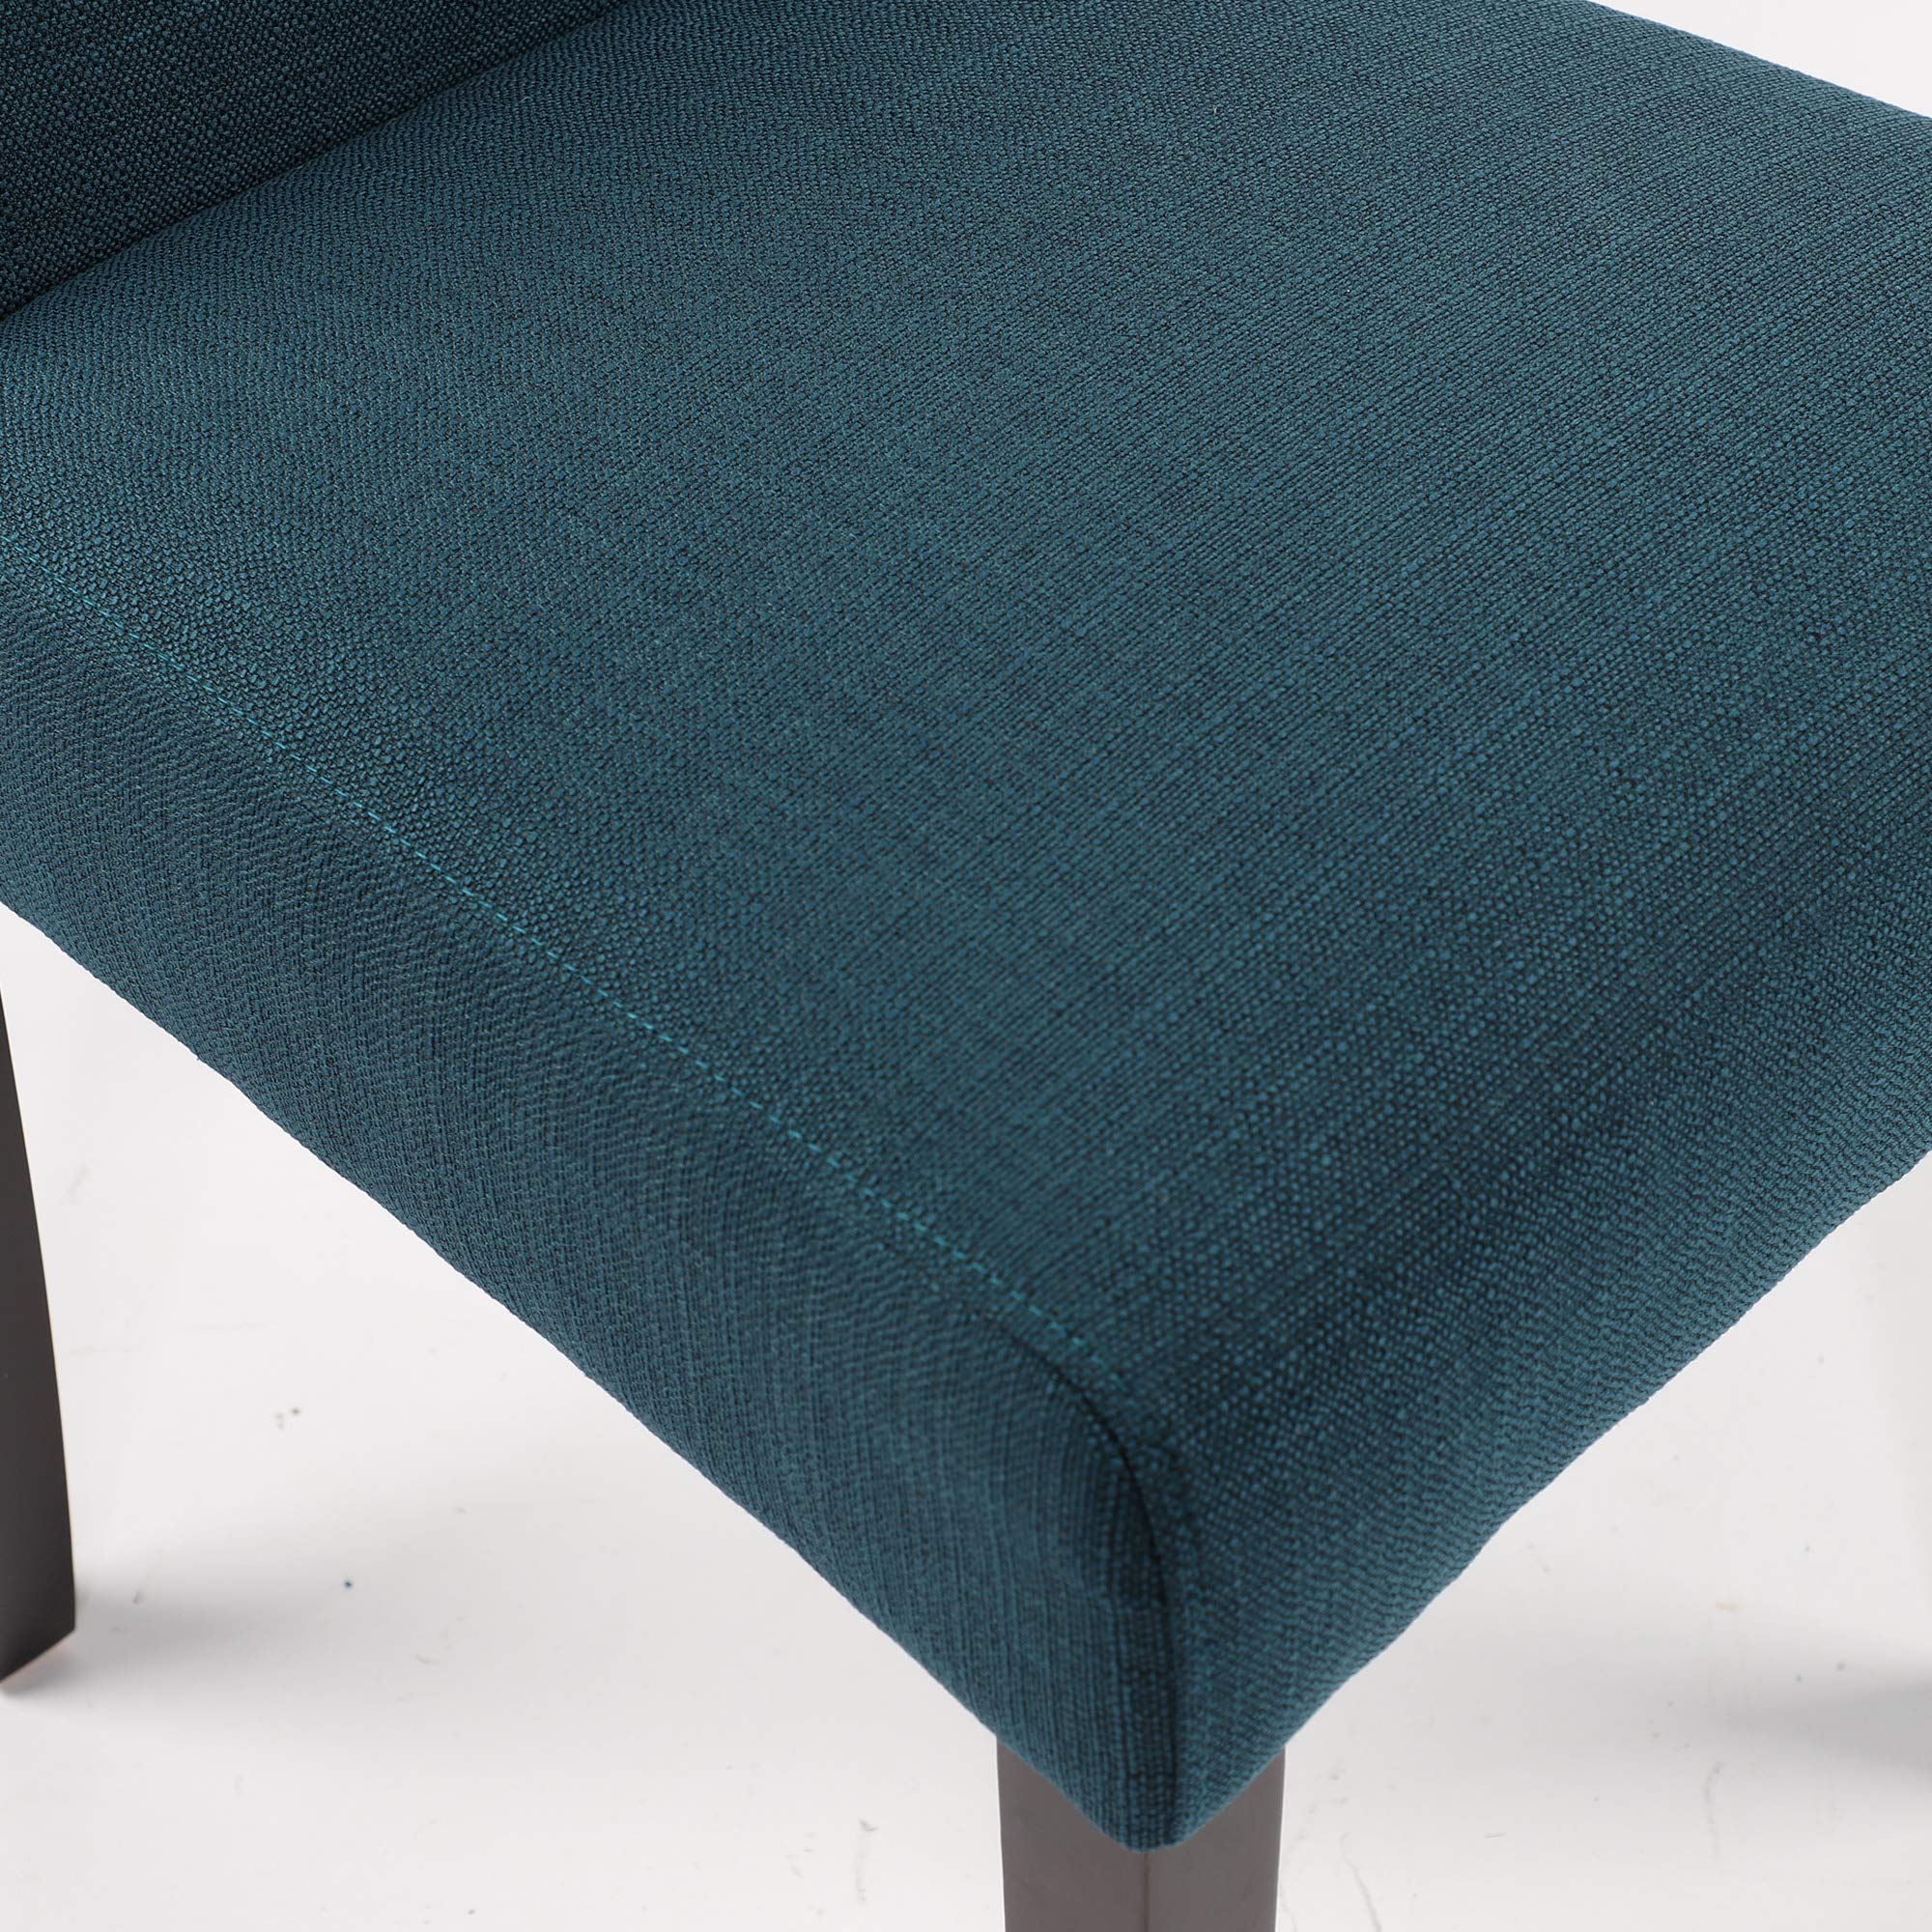 LSSBOUGHT Set of 2 Luxurious Fabric Dining Chairs with Copper Nails and Solid Wood Legs (Teal)